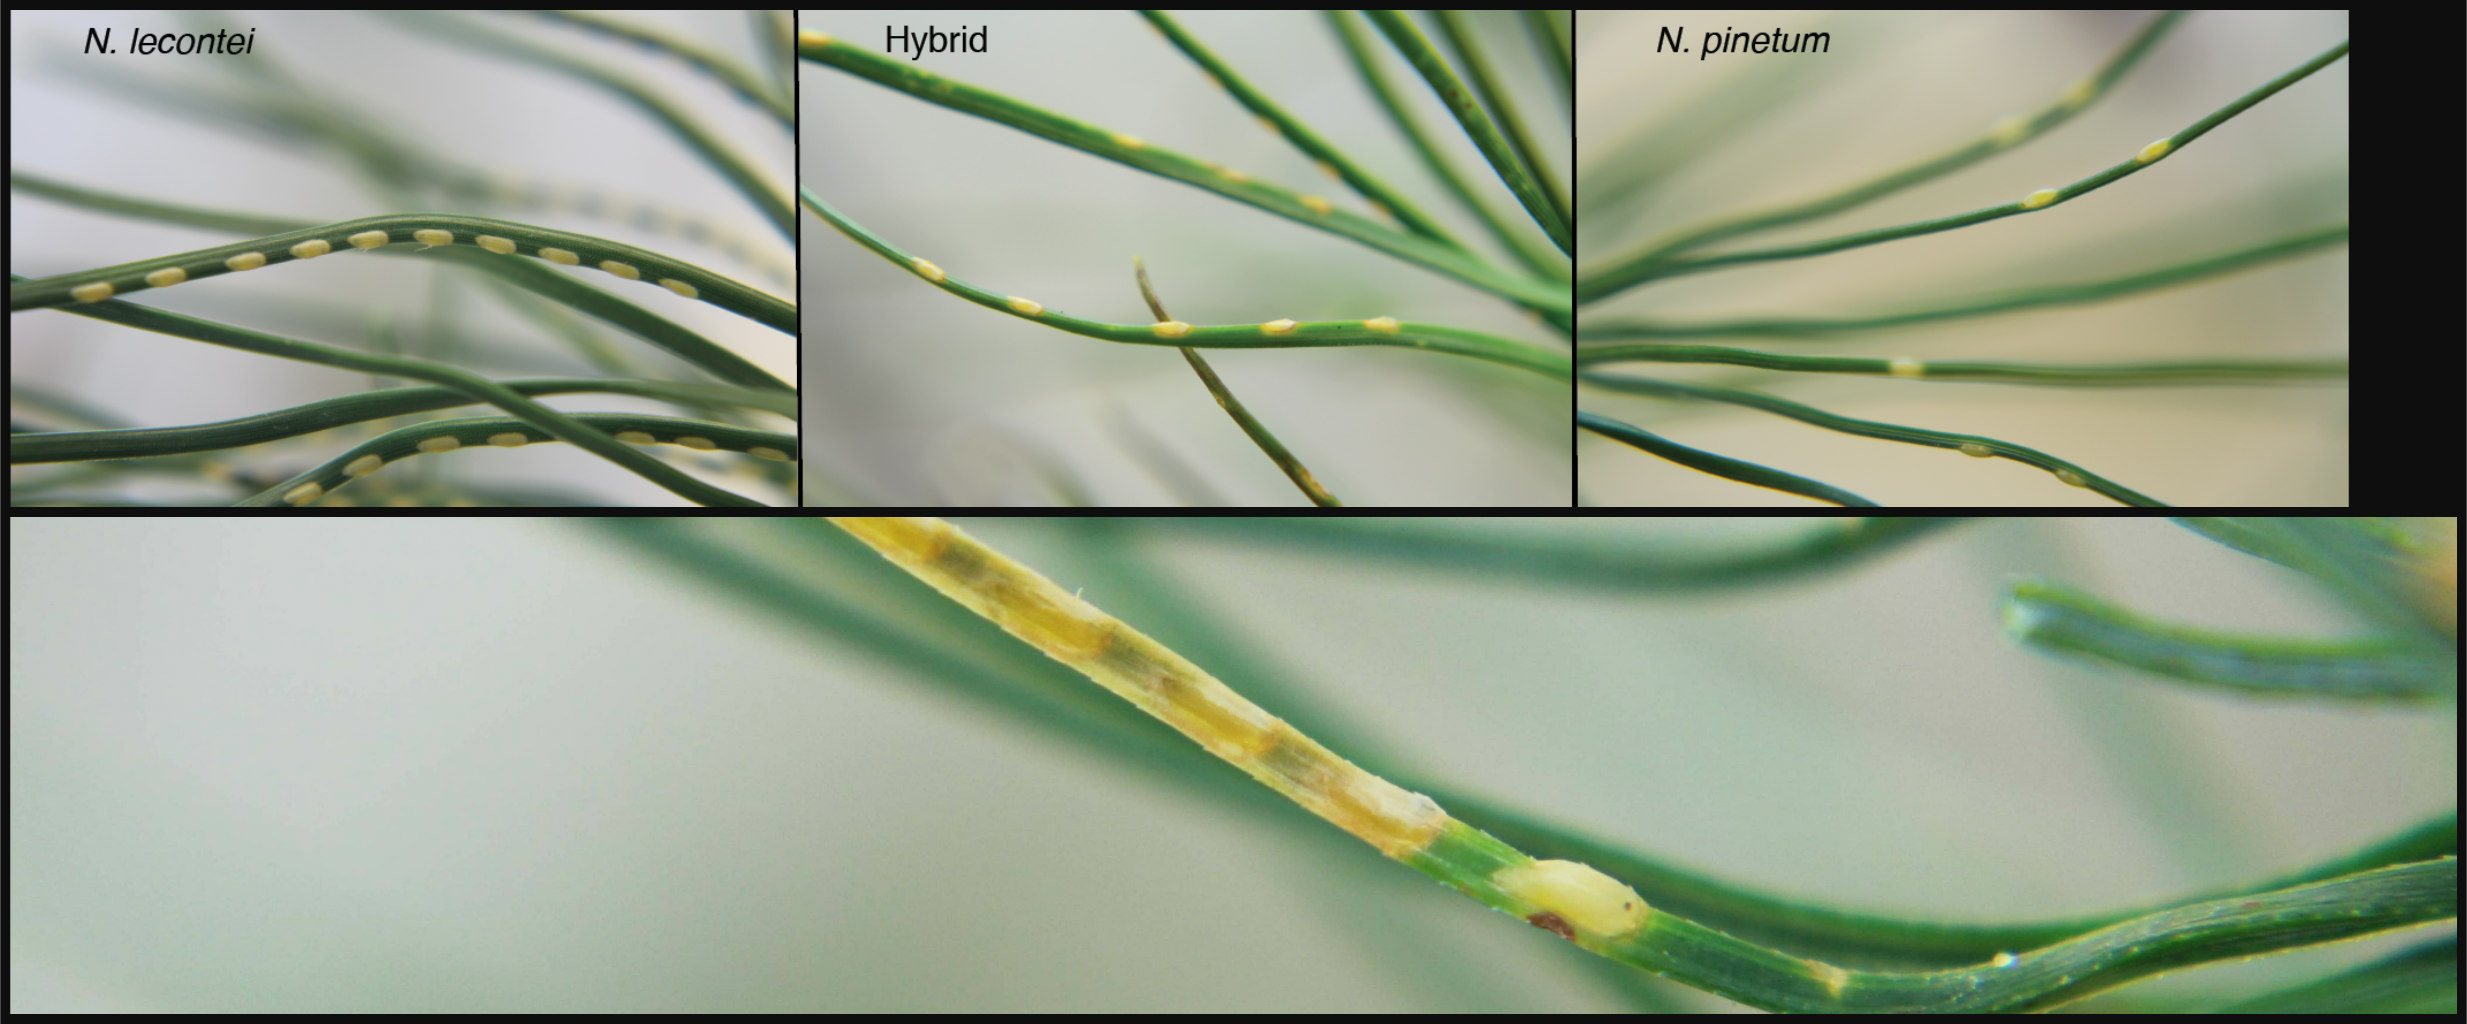 N. lecontei (top-left) females lay many closely spaced eggs per needle. N. pinetum (top-right) females lay few widely spaced eggs. Hybrid (top-middle) females have an intermediate egg laying pattern. Bottom image shows a single developing N. lecontei egg on white pine. The rest of the eggs on the needle have dried out and died 